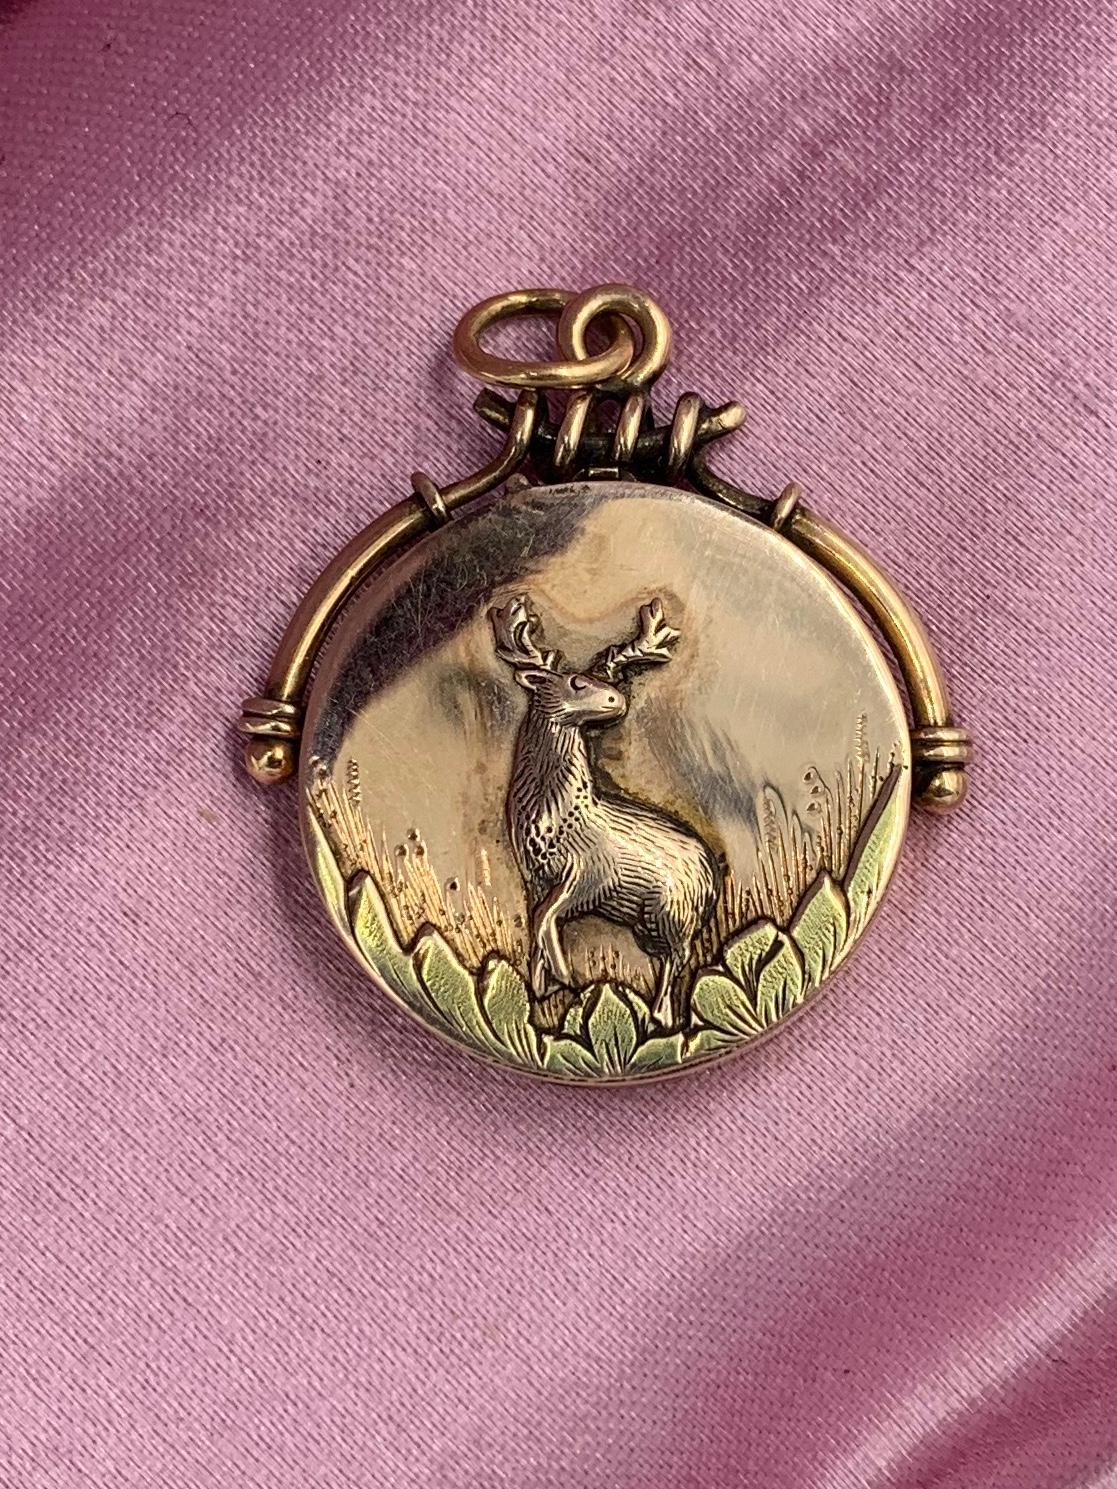 A rare and wonderful antique Belle Epoque, Victorian locket pendant with a beautifully modeled Deer, Stag with handsome antlers standing among grasses and leaves, in 10 Karat Rose Gold.   We love our antique animal jewelry and this one has such